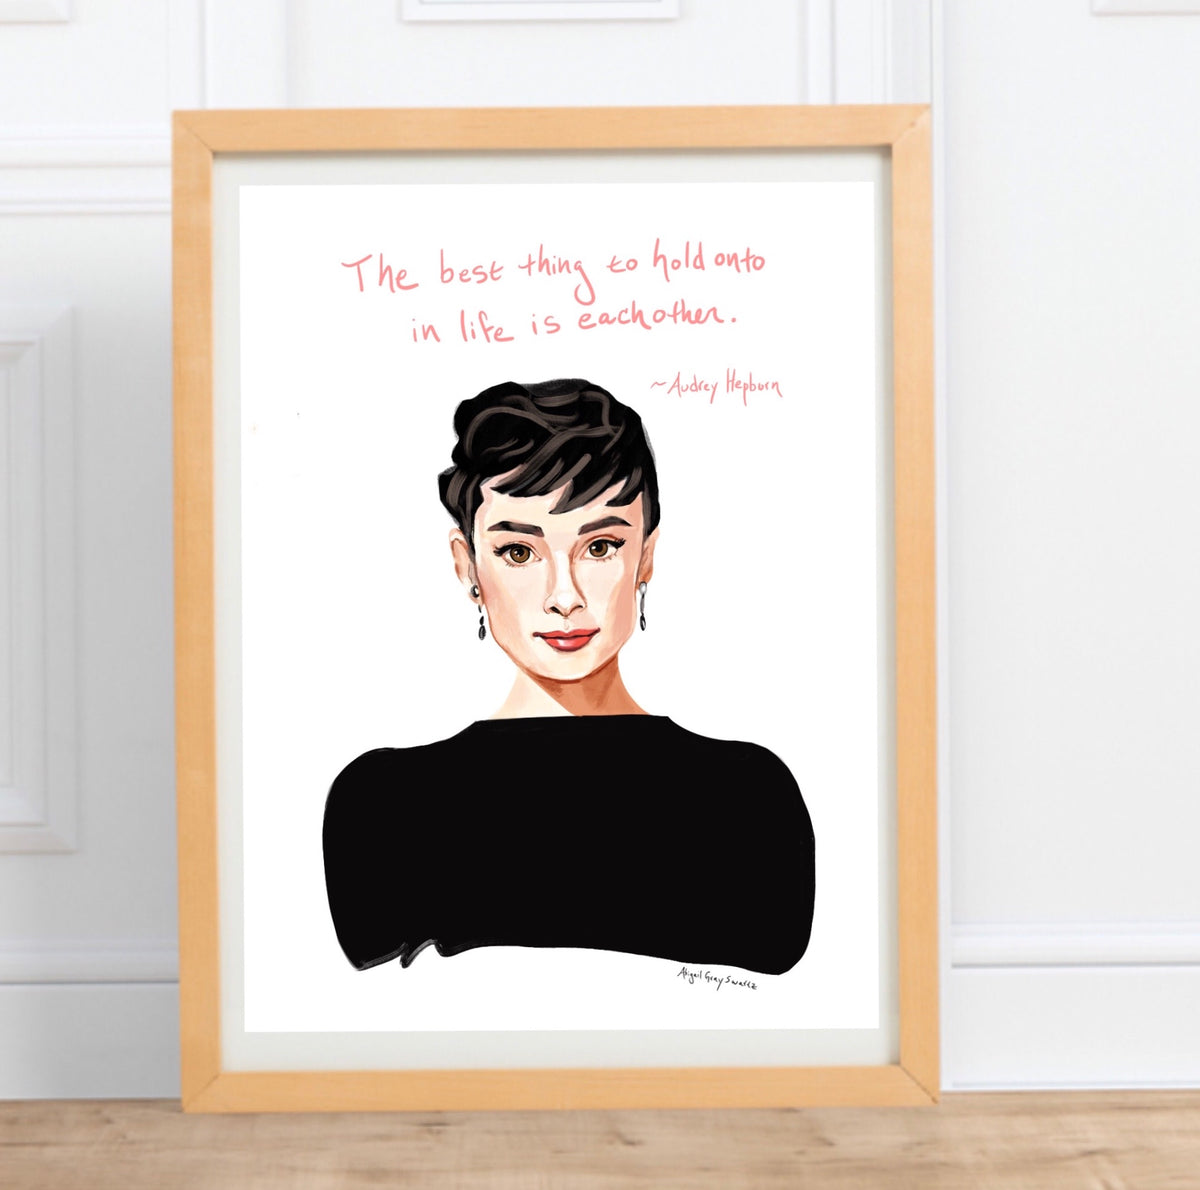 Audrey Hepburn Portrait and inspiring quote || The best thing to hold onto in life is each other - quote--Print